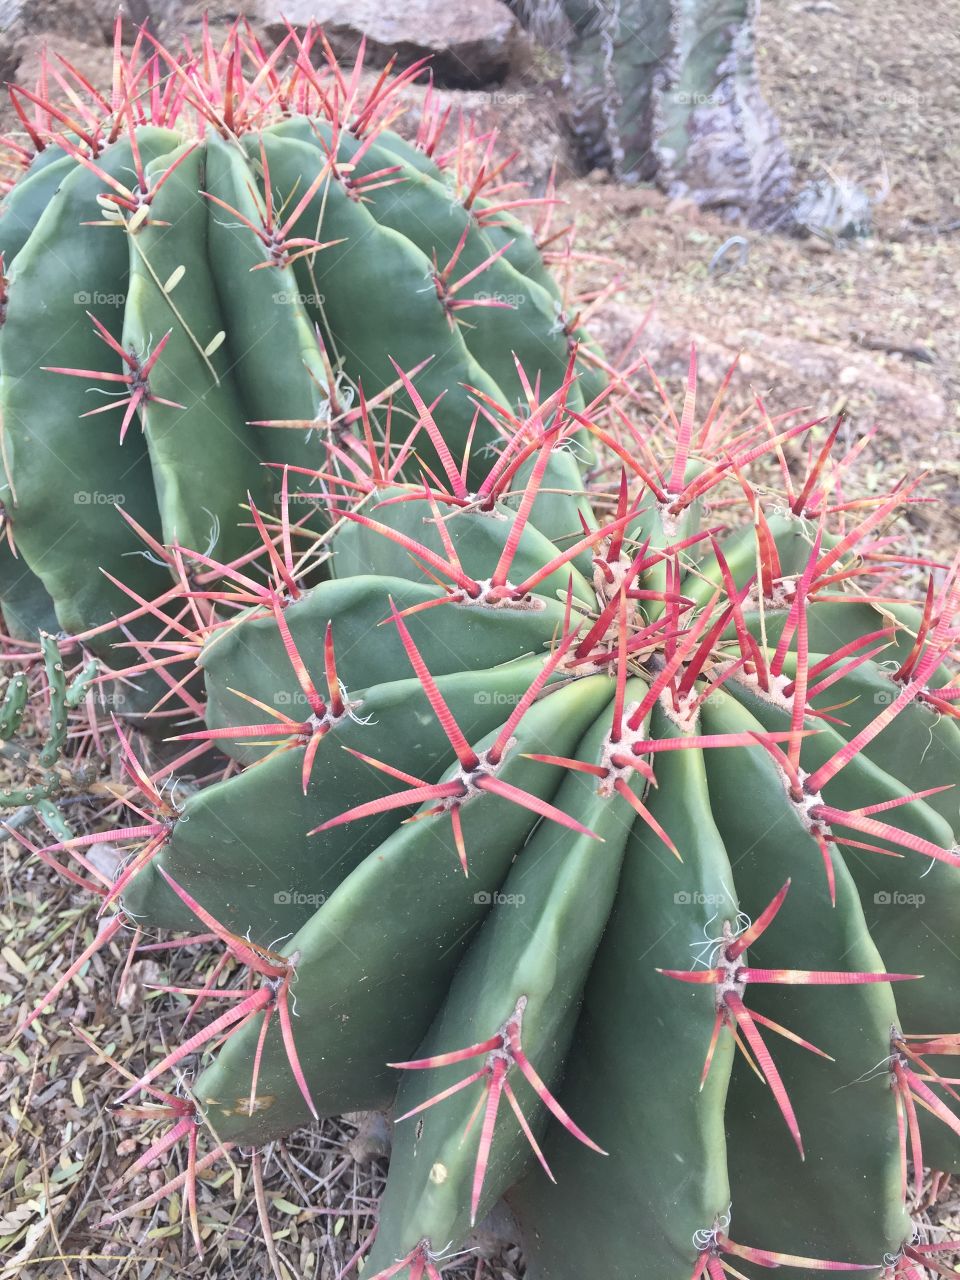 Red spine cactus